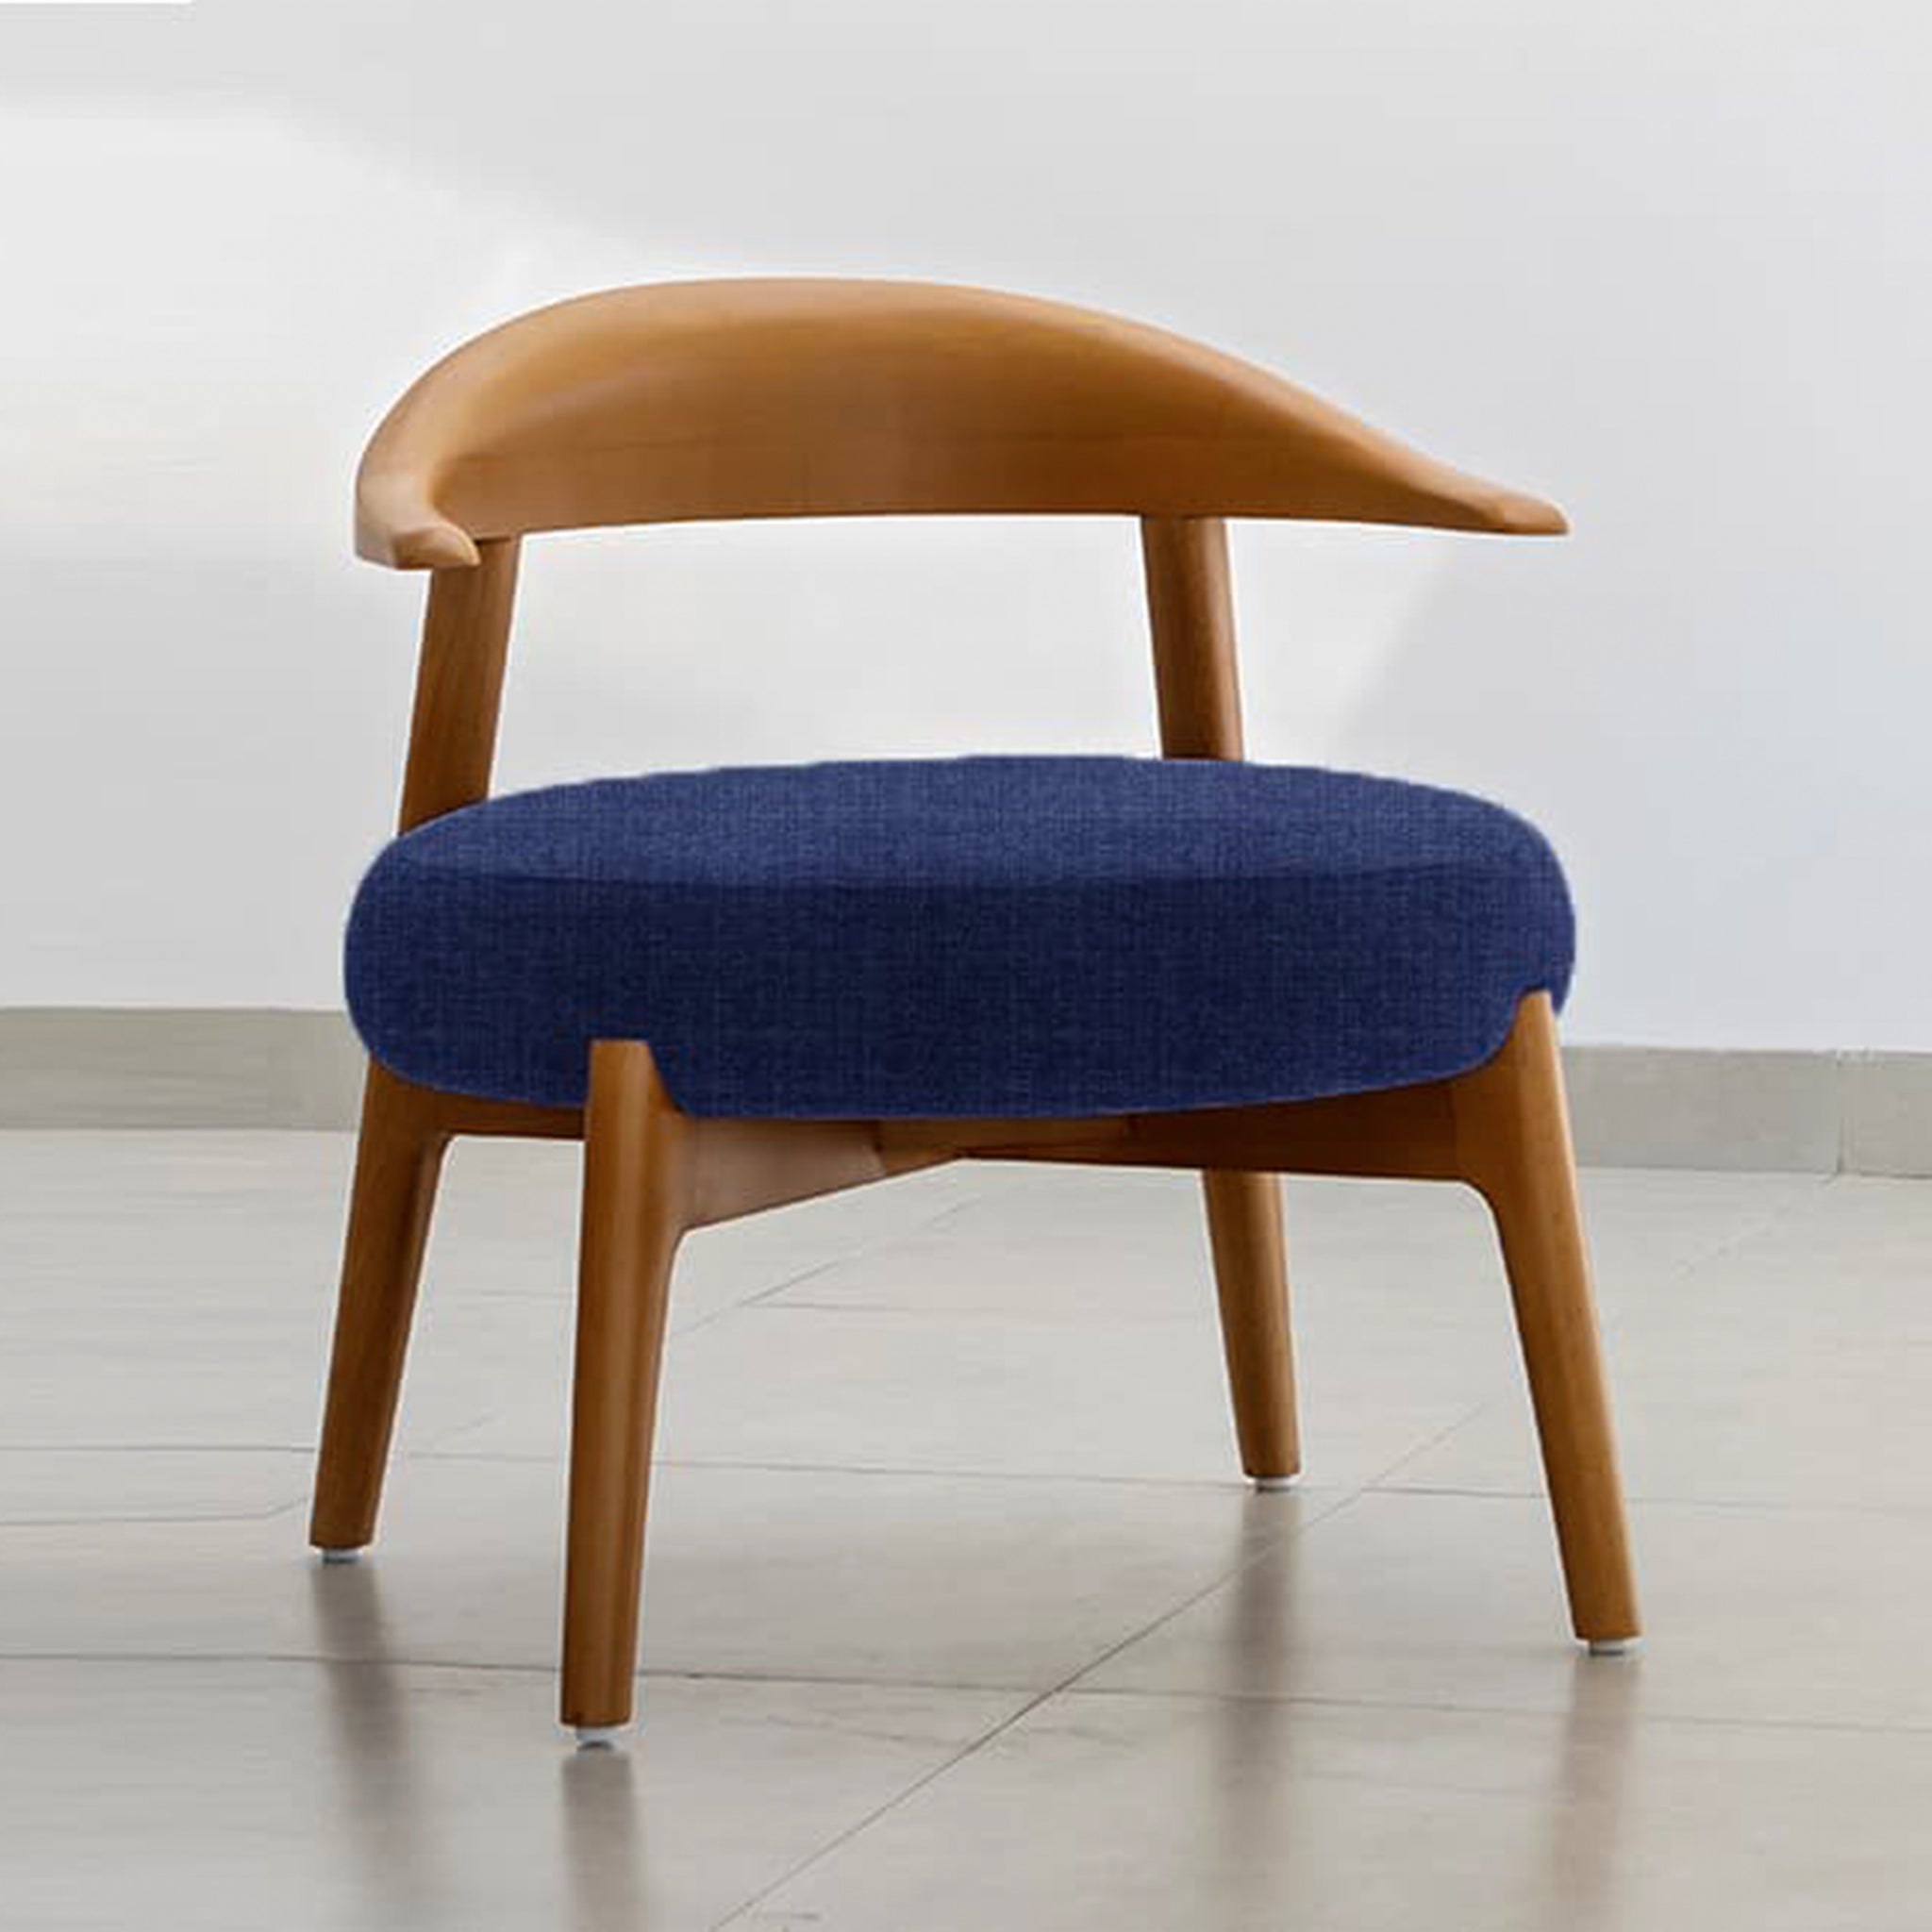 "The Hyde Accent Chair with elegant wooden curves and plush seating"